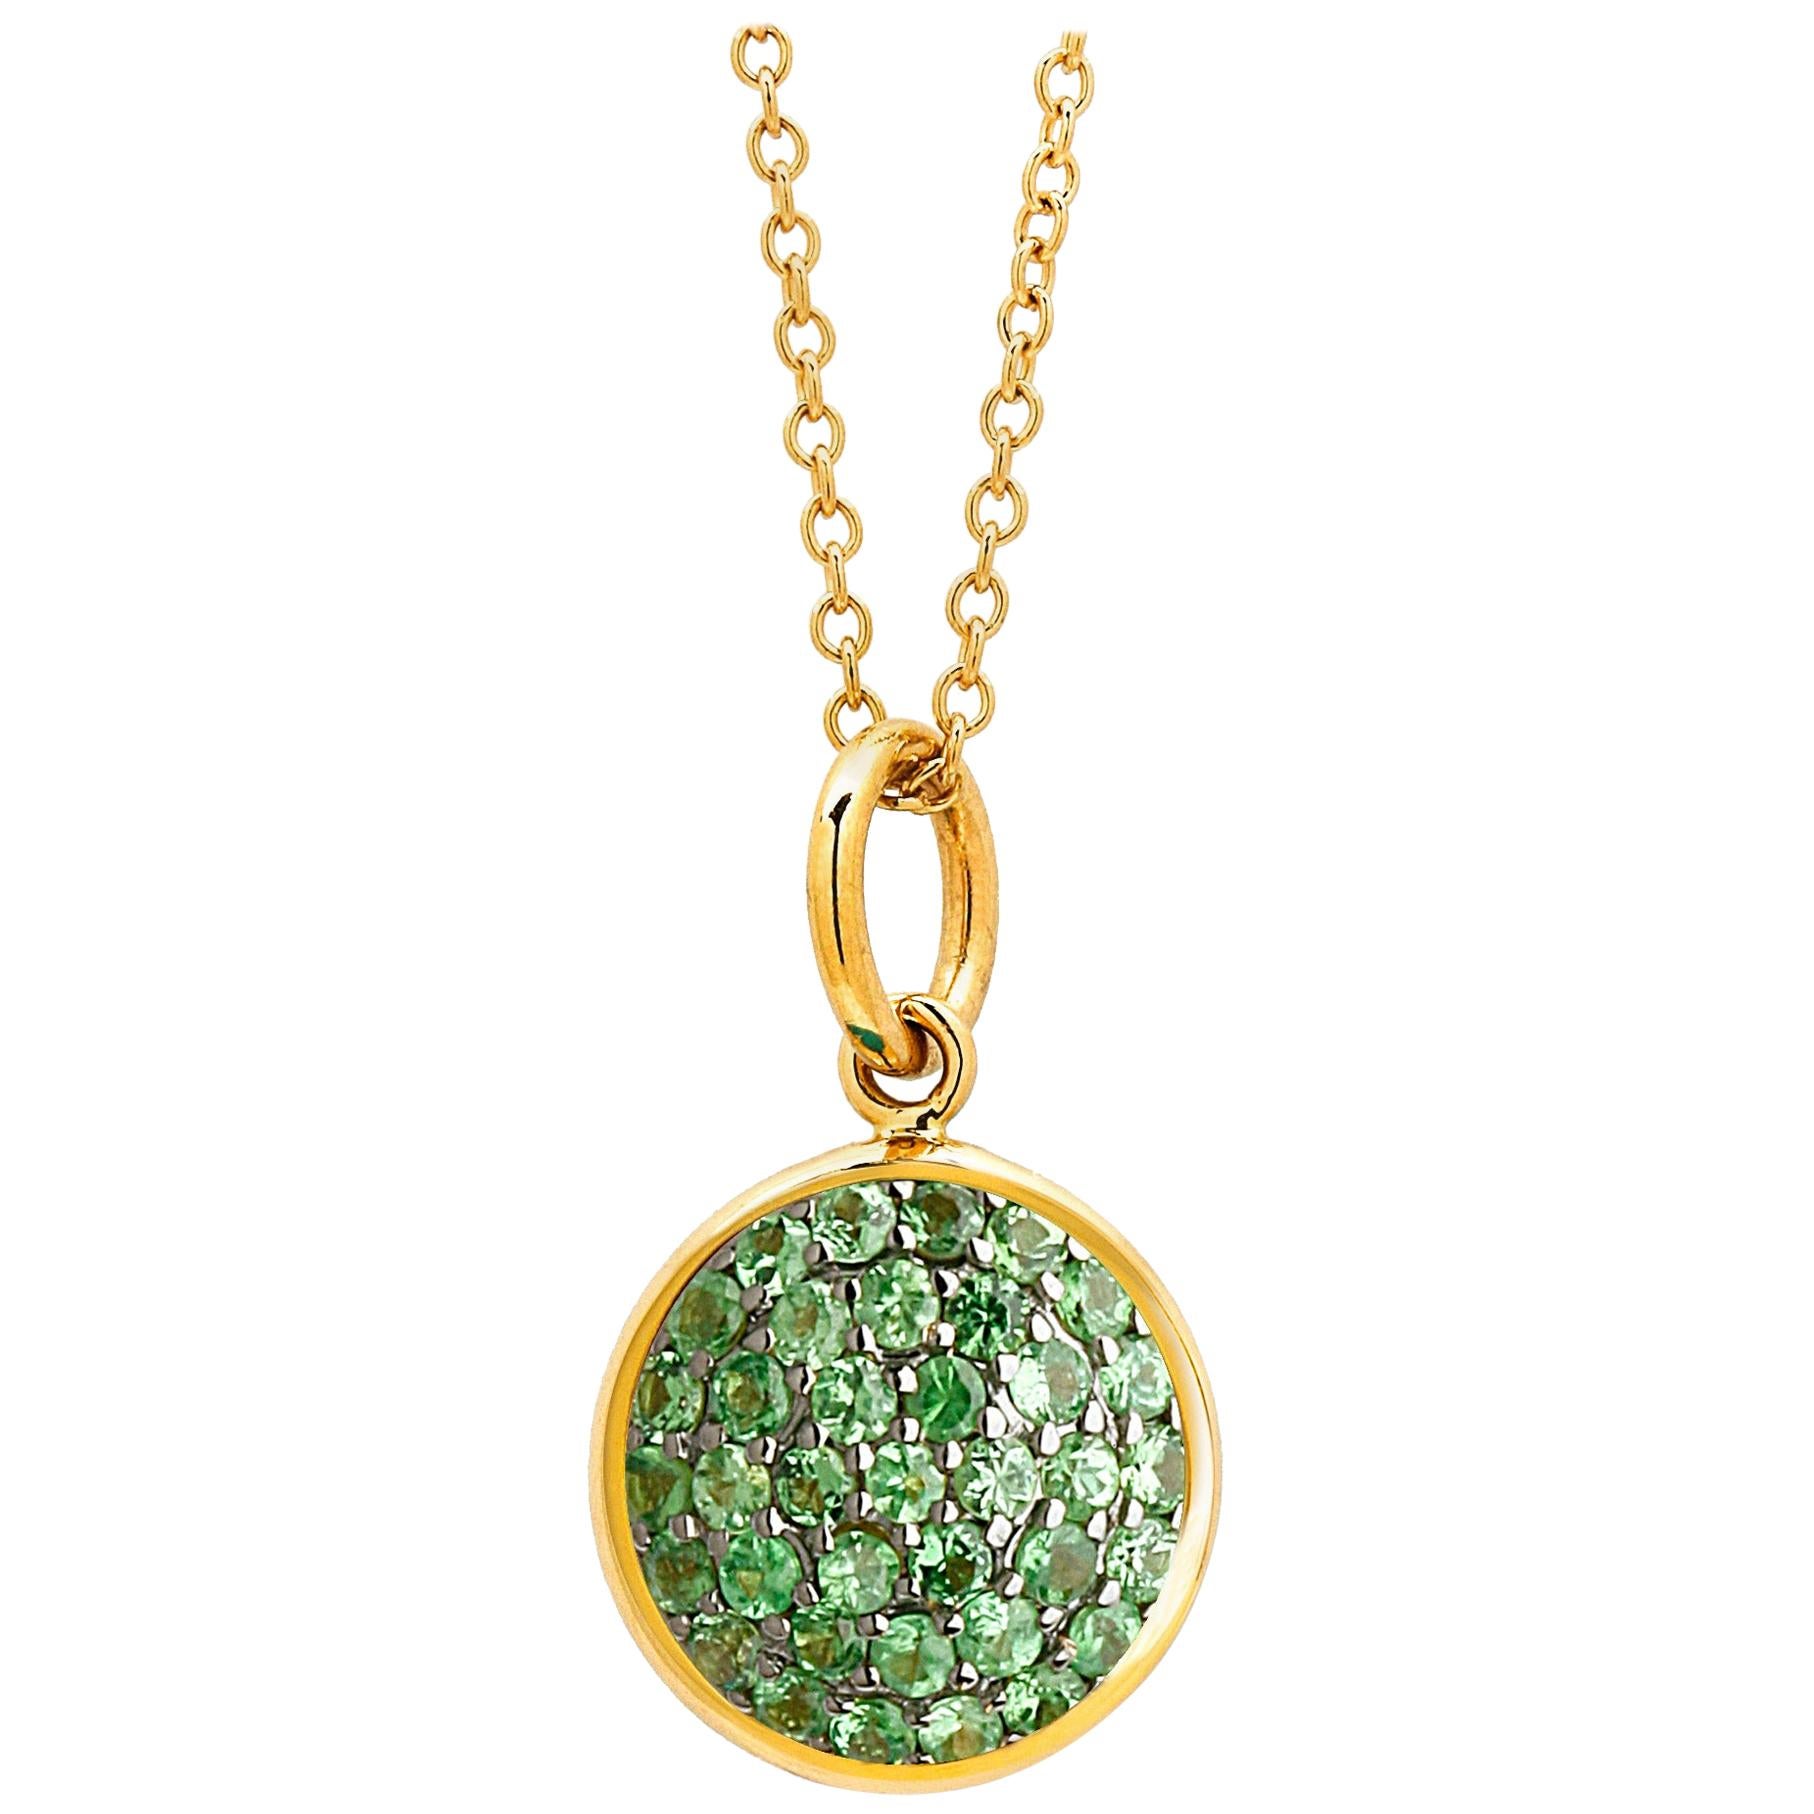 Syna Yellow Gold Charm Pendant with Tsavorite